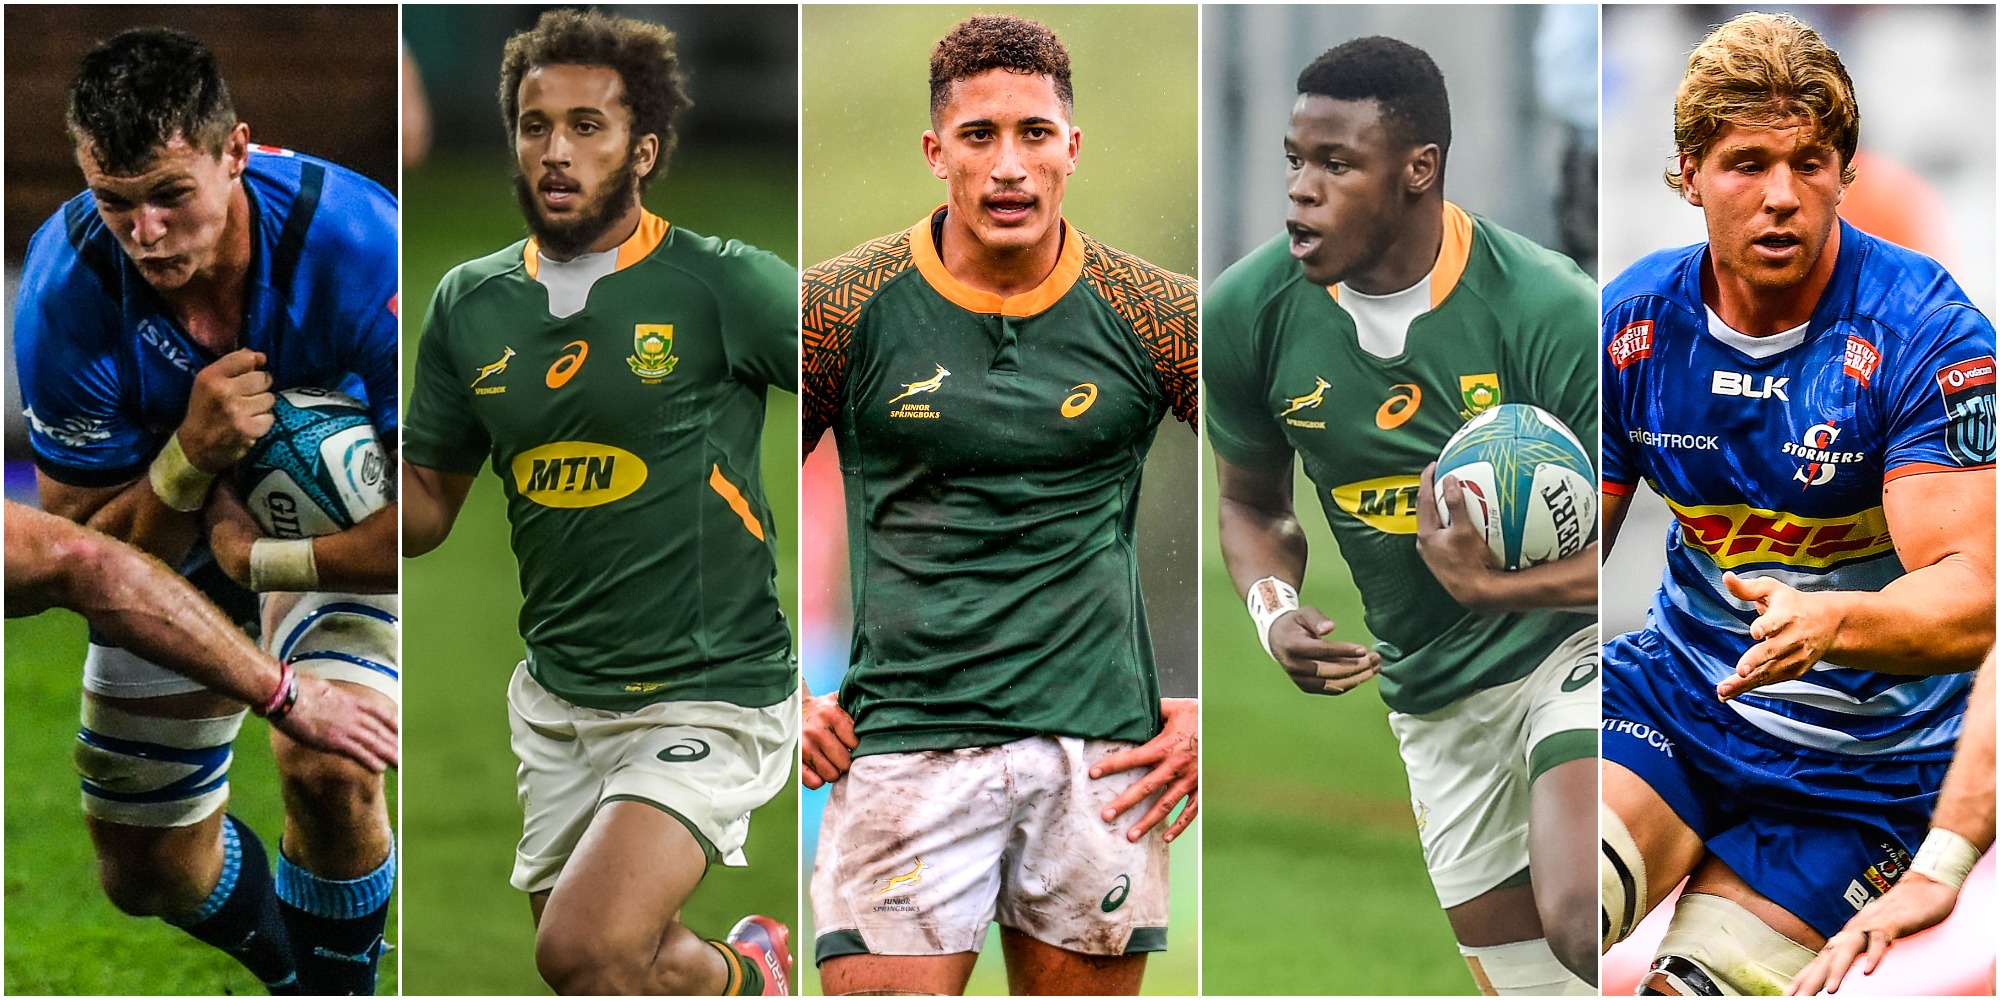 Young Player of the Year nominees (left to right): Louw, Jaden Hendrikse, Jordan Hendrikse, Fassi and Roos.